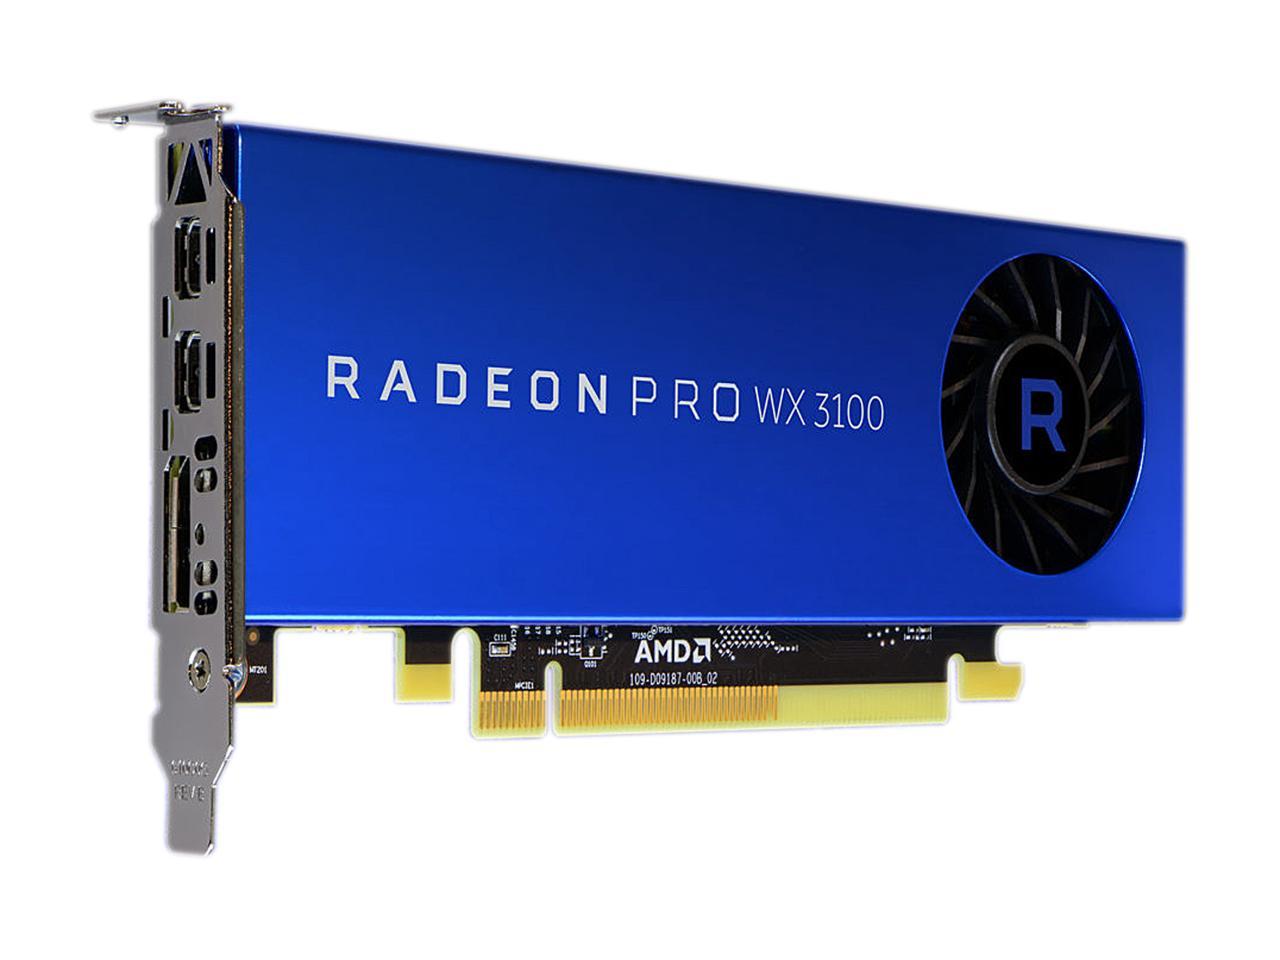 AMD Radeon Pro WX 3100 100-505999 PCI-Express x16 (x8 Electrical) Half Height Workstation Video Card